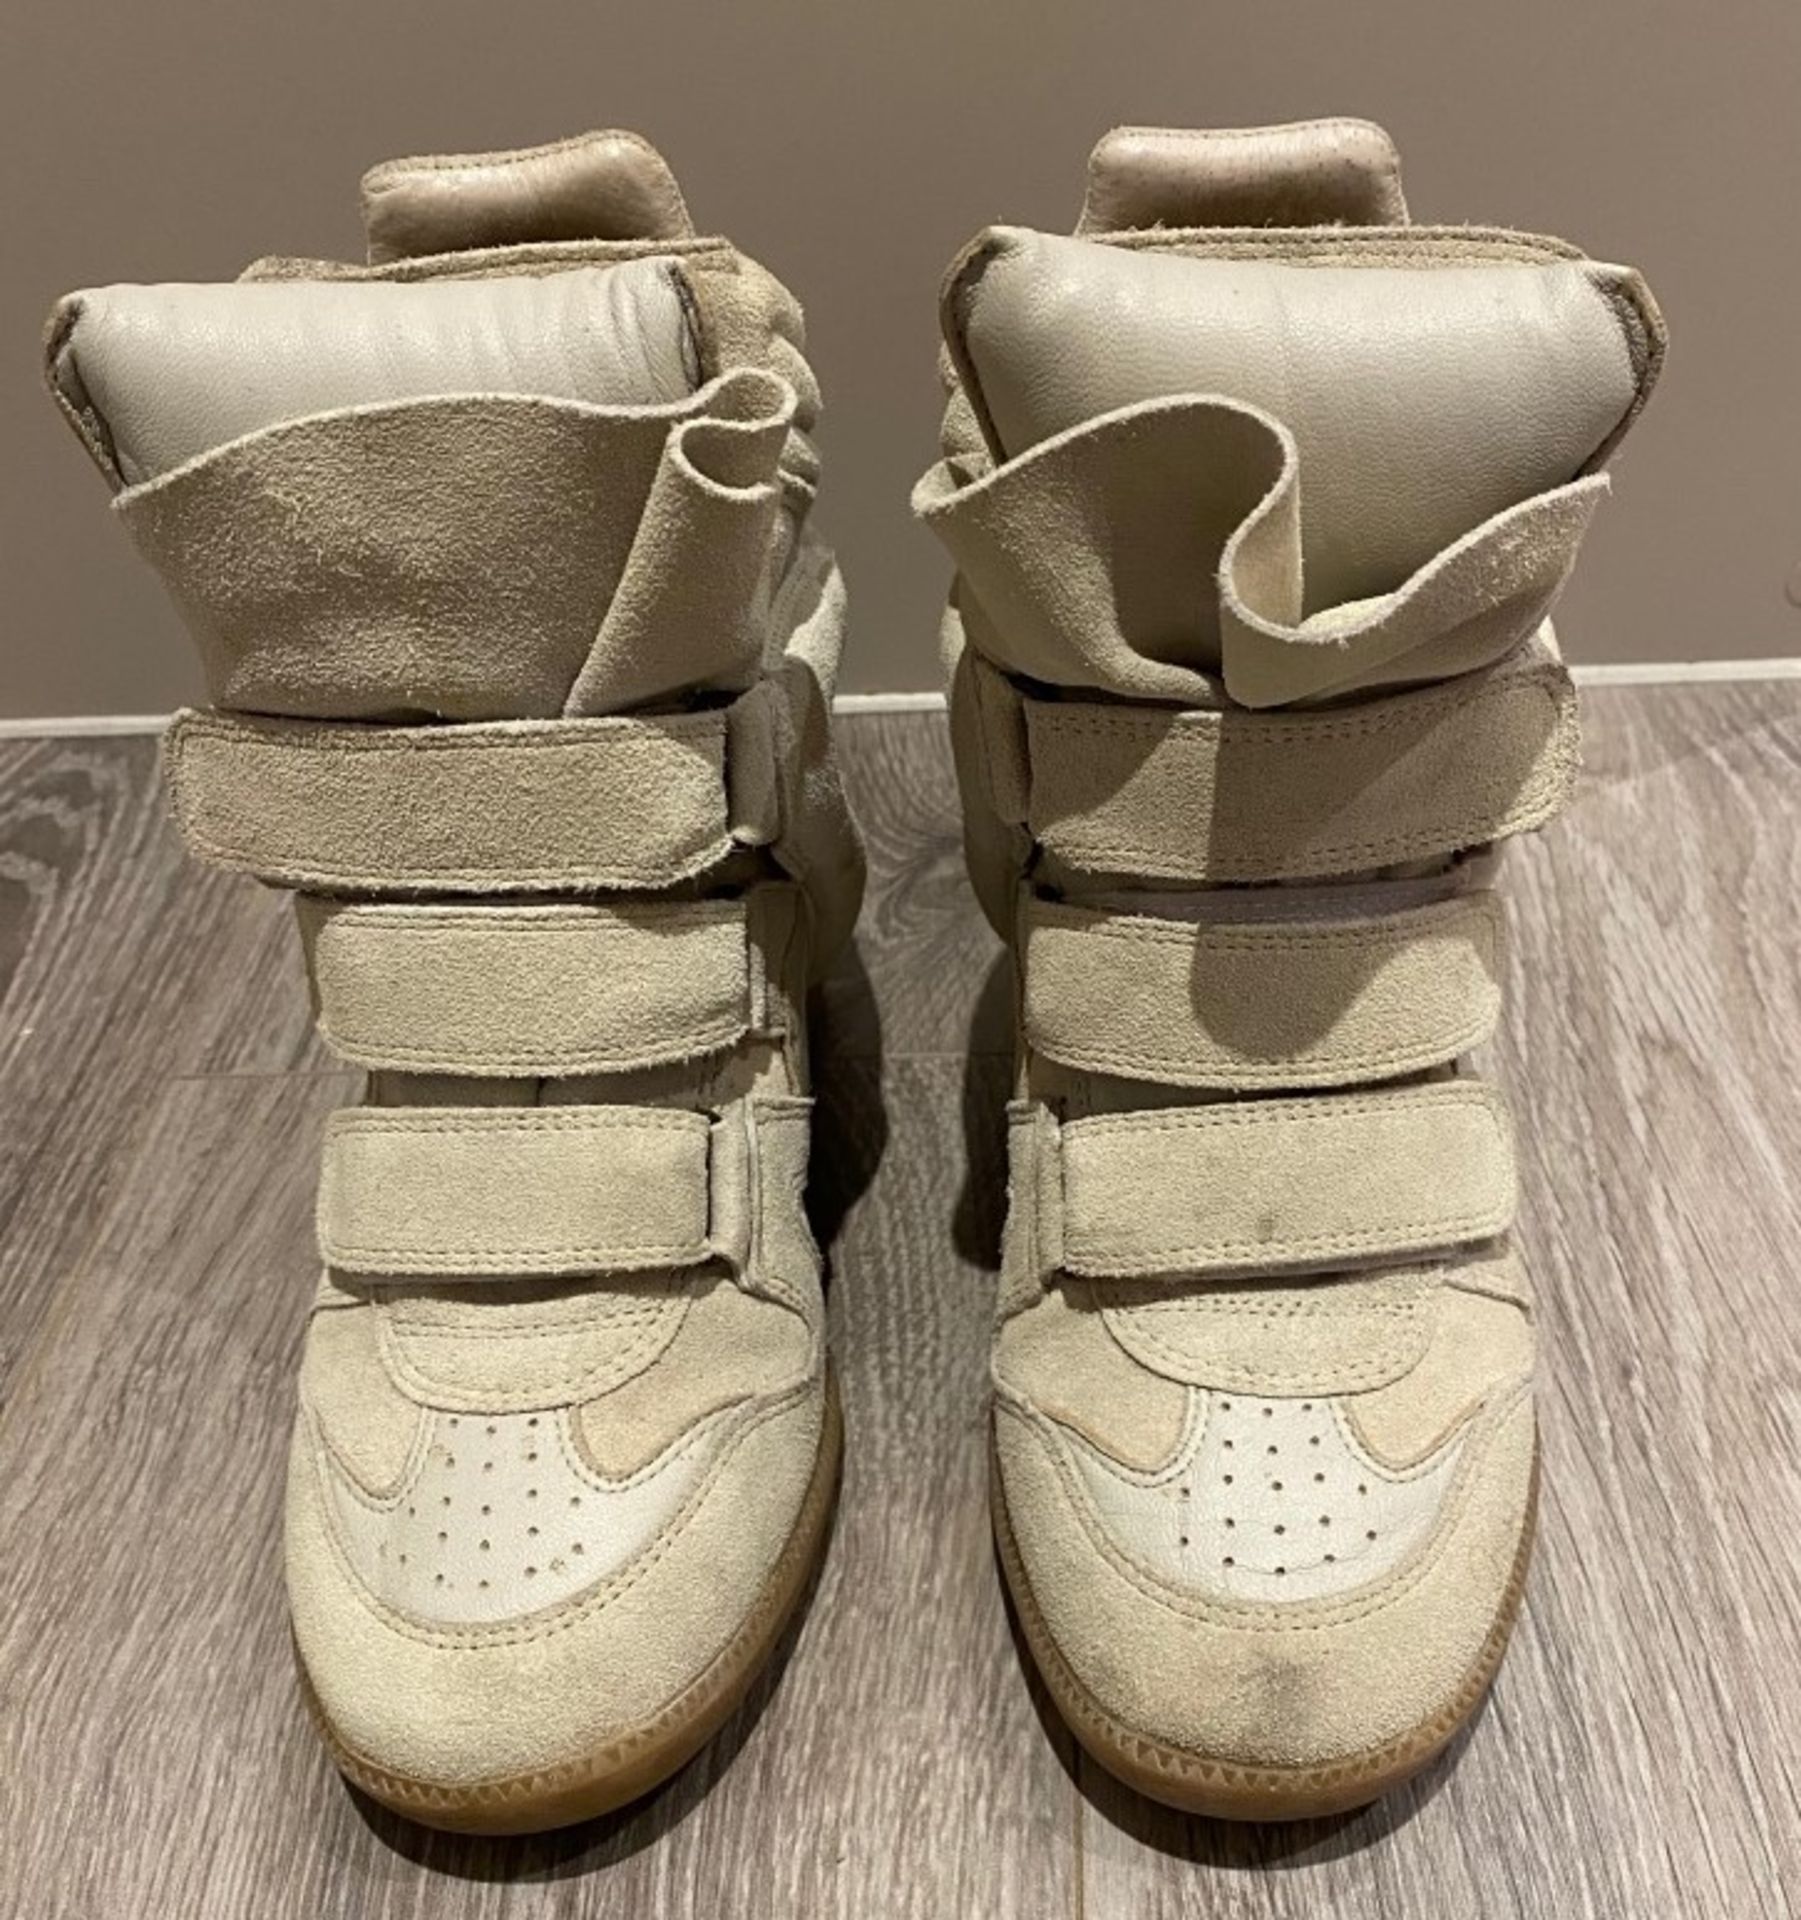 1 x Pair Of Genuine Isabel Marant Boots In Crème - Size: 36 - Preowned in Very Good Condition - Ref: